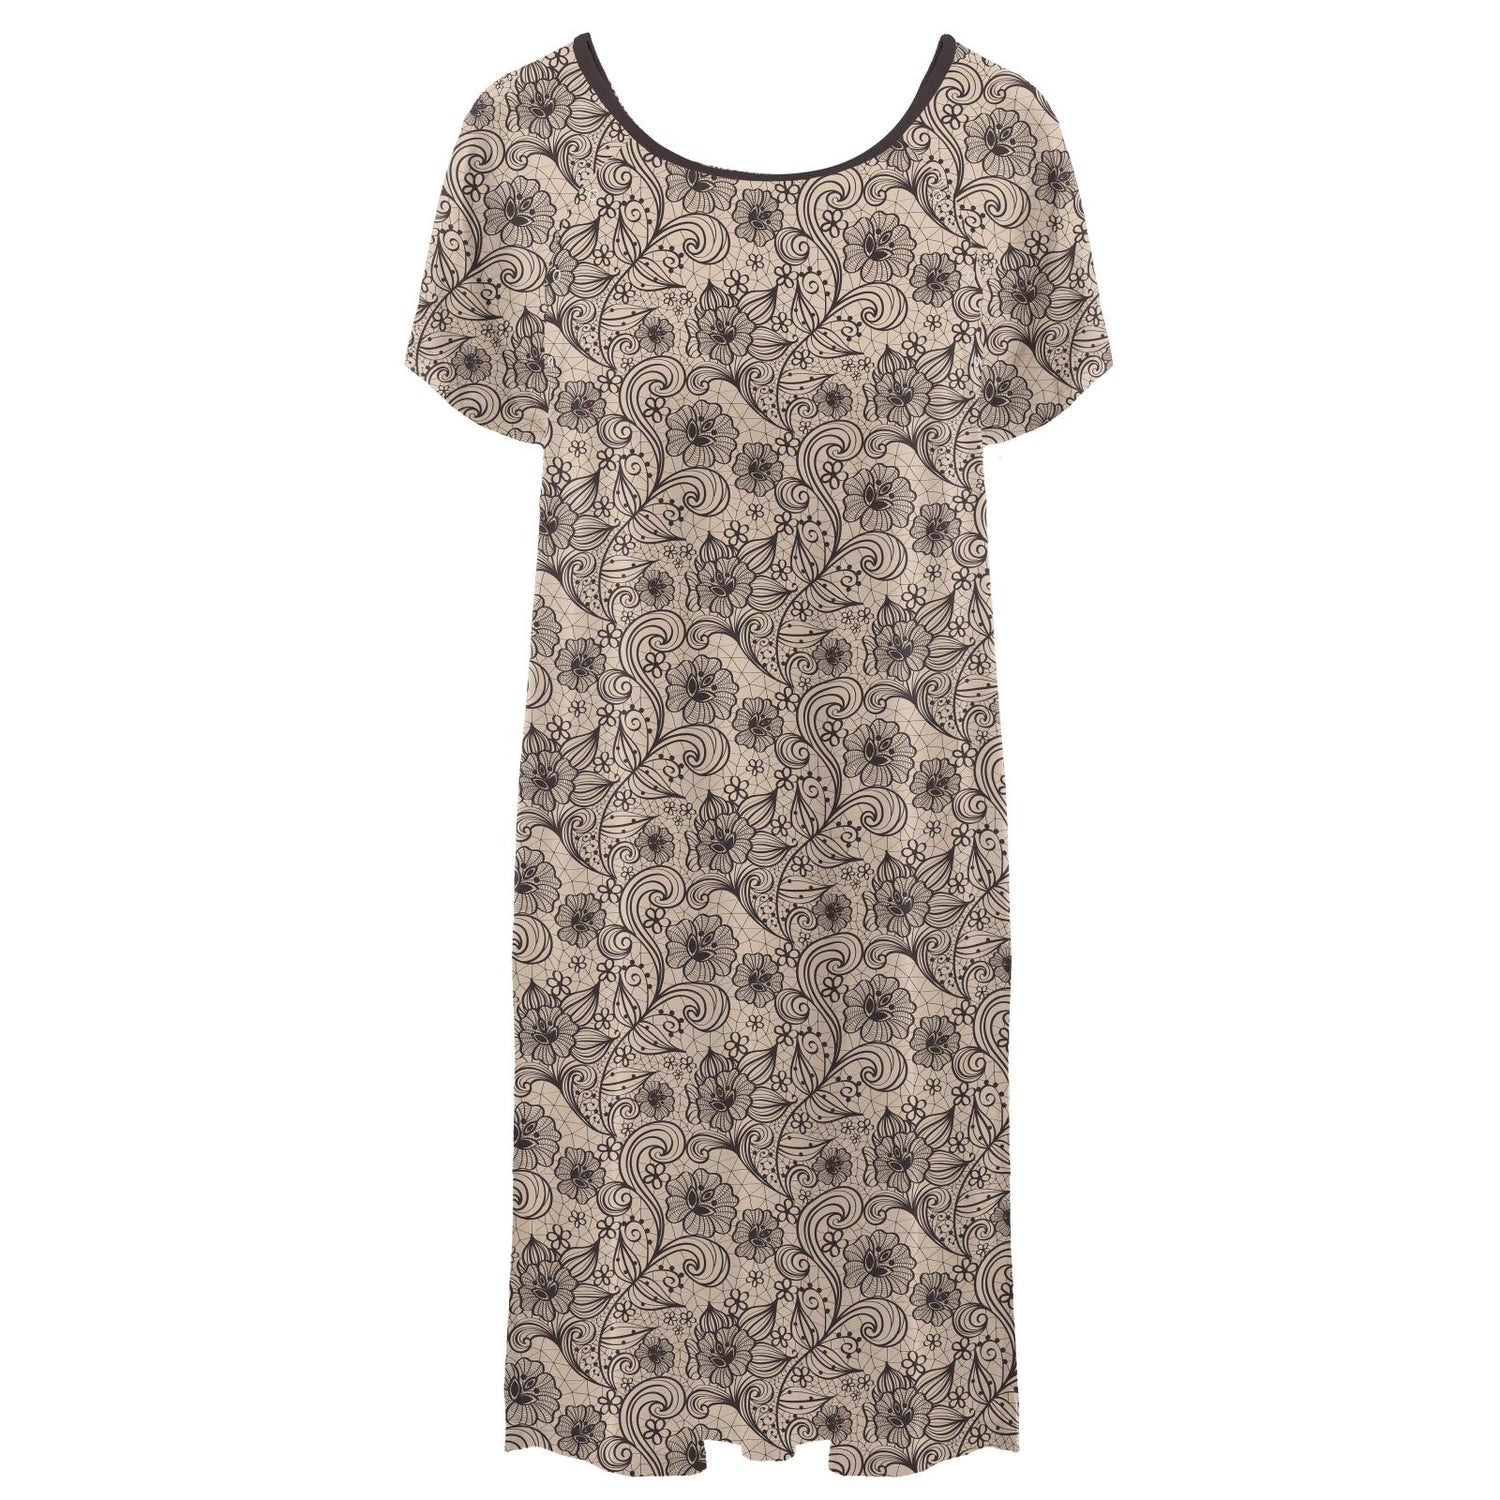 Women's Print Hospital Gown in Burlap Lace